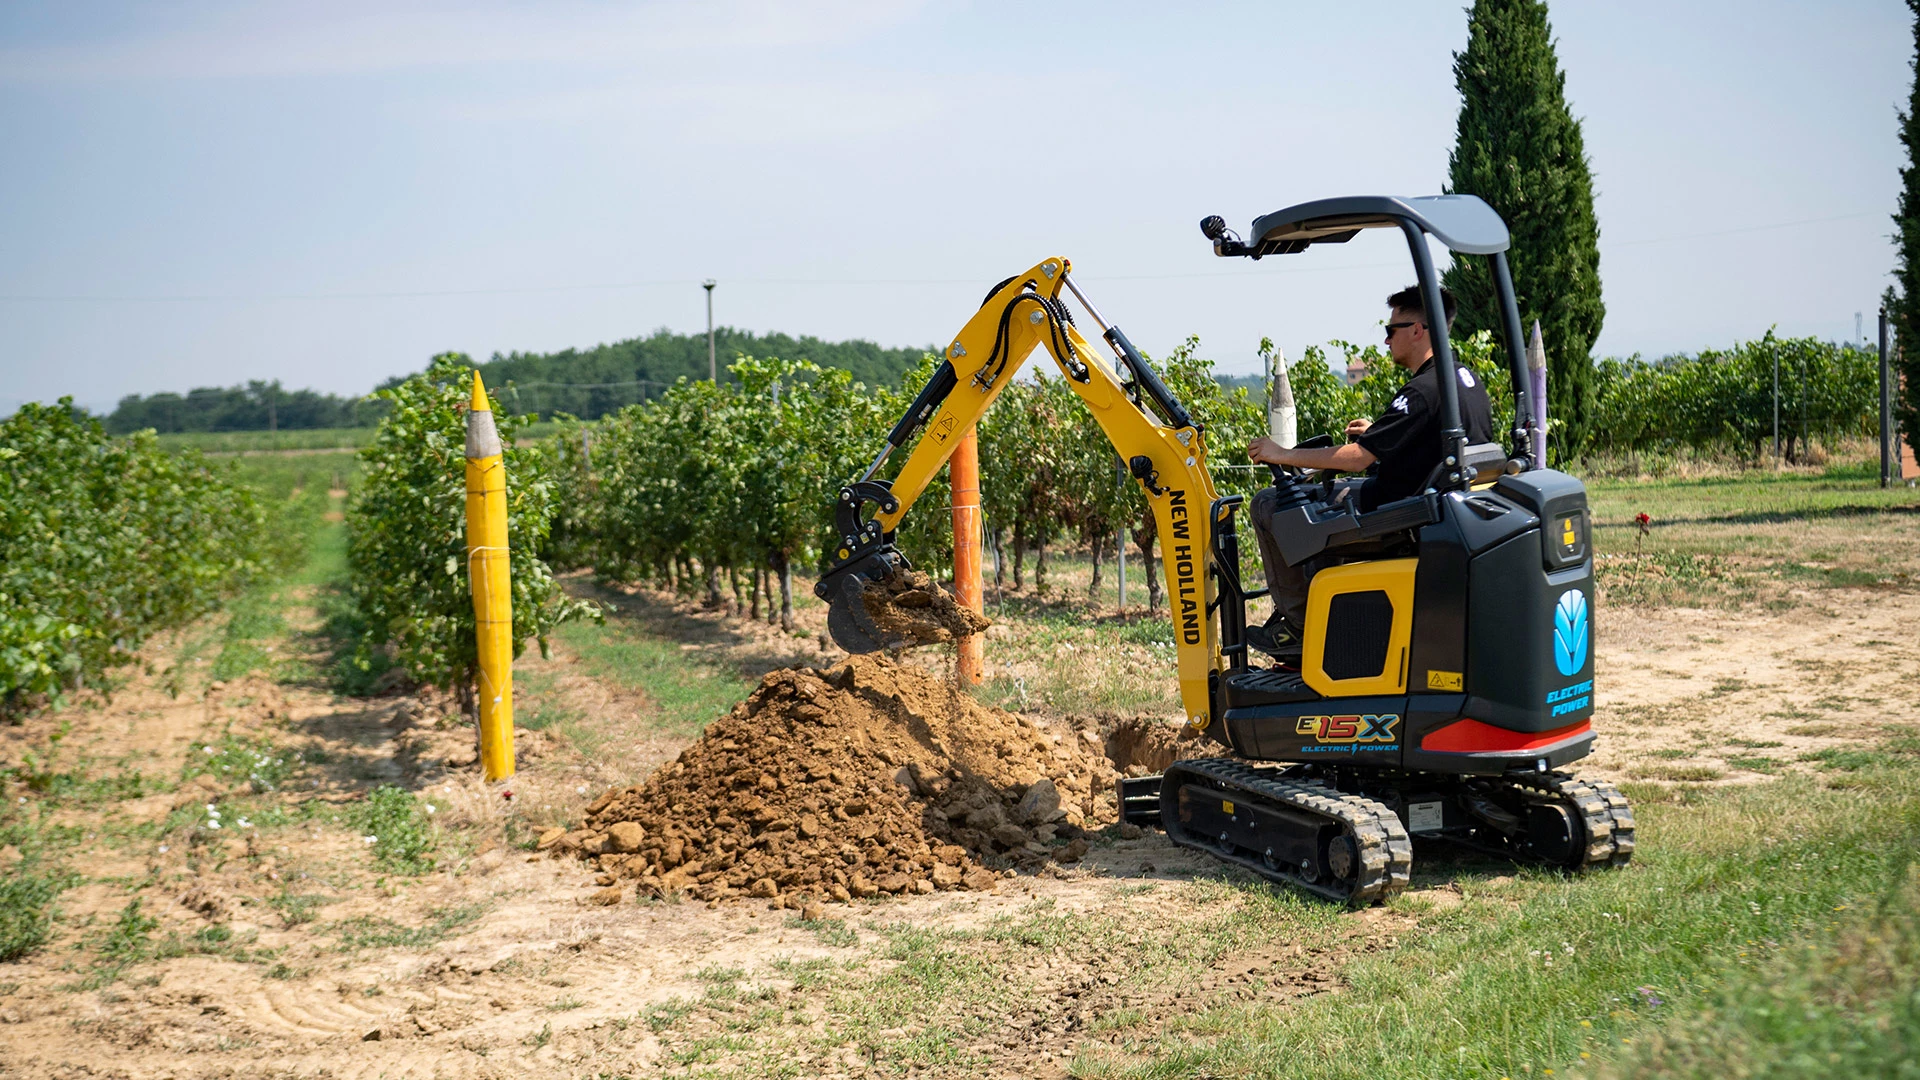 Operator in New Holland mini crawler excavator, working in field with clear blue sky.